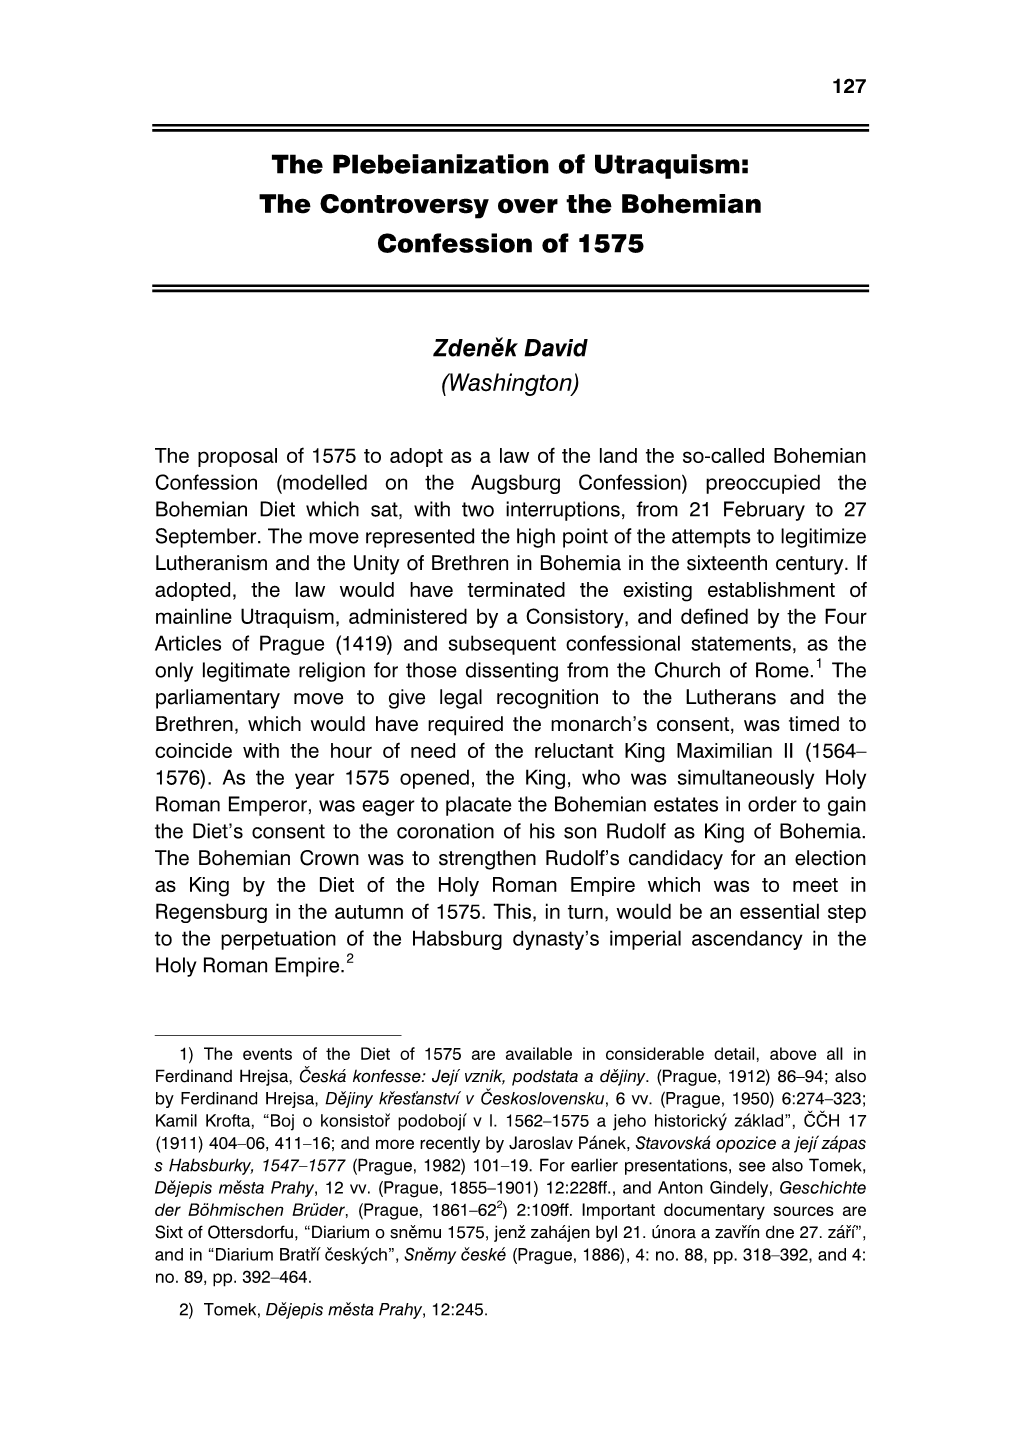 The Plebeianization of Utraquism: the Controversy Over the Bohemian Confession of 1575